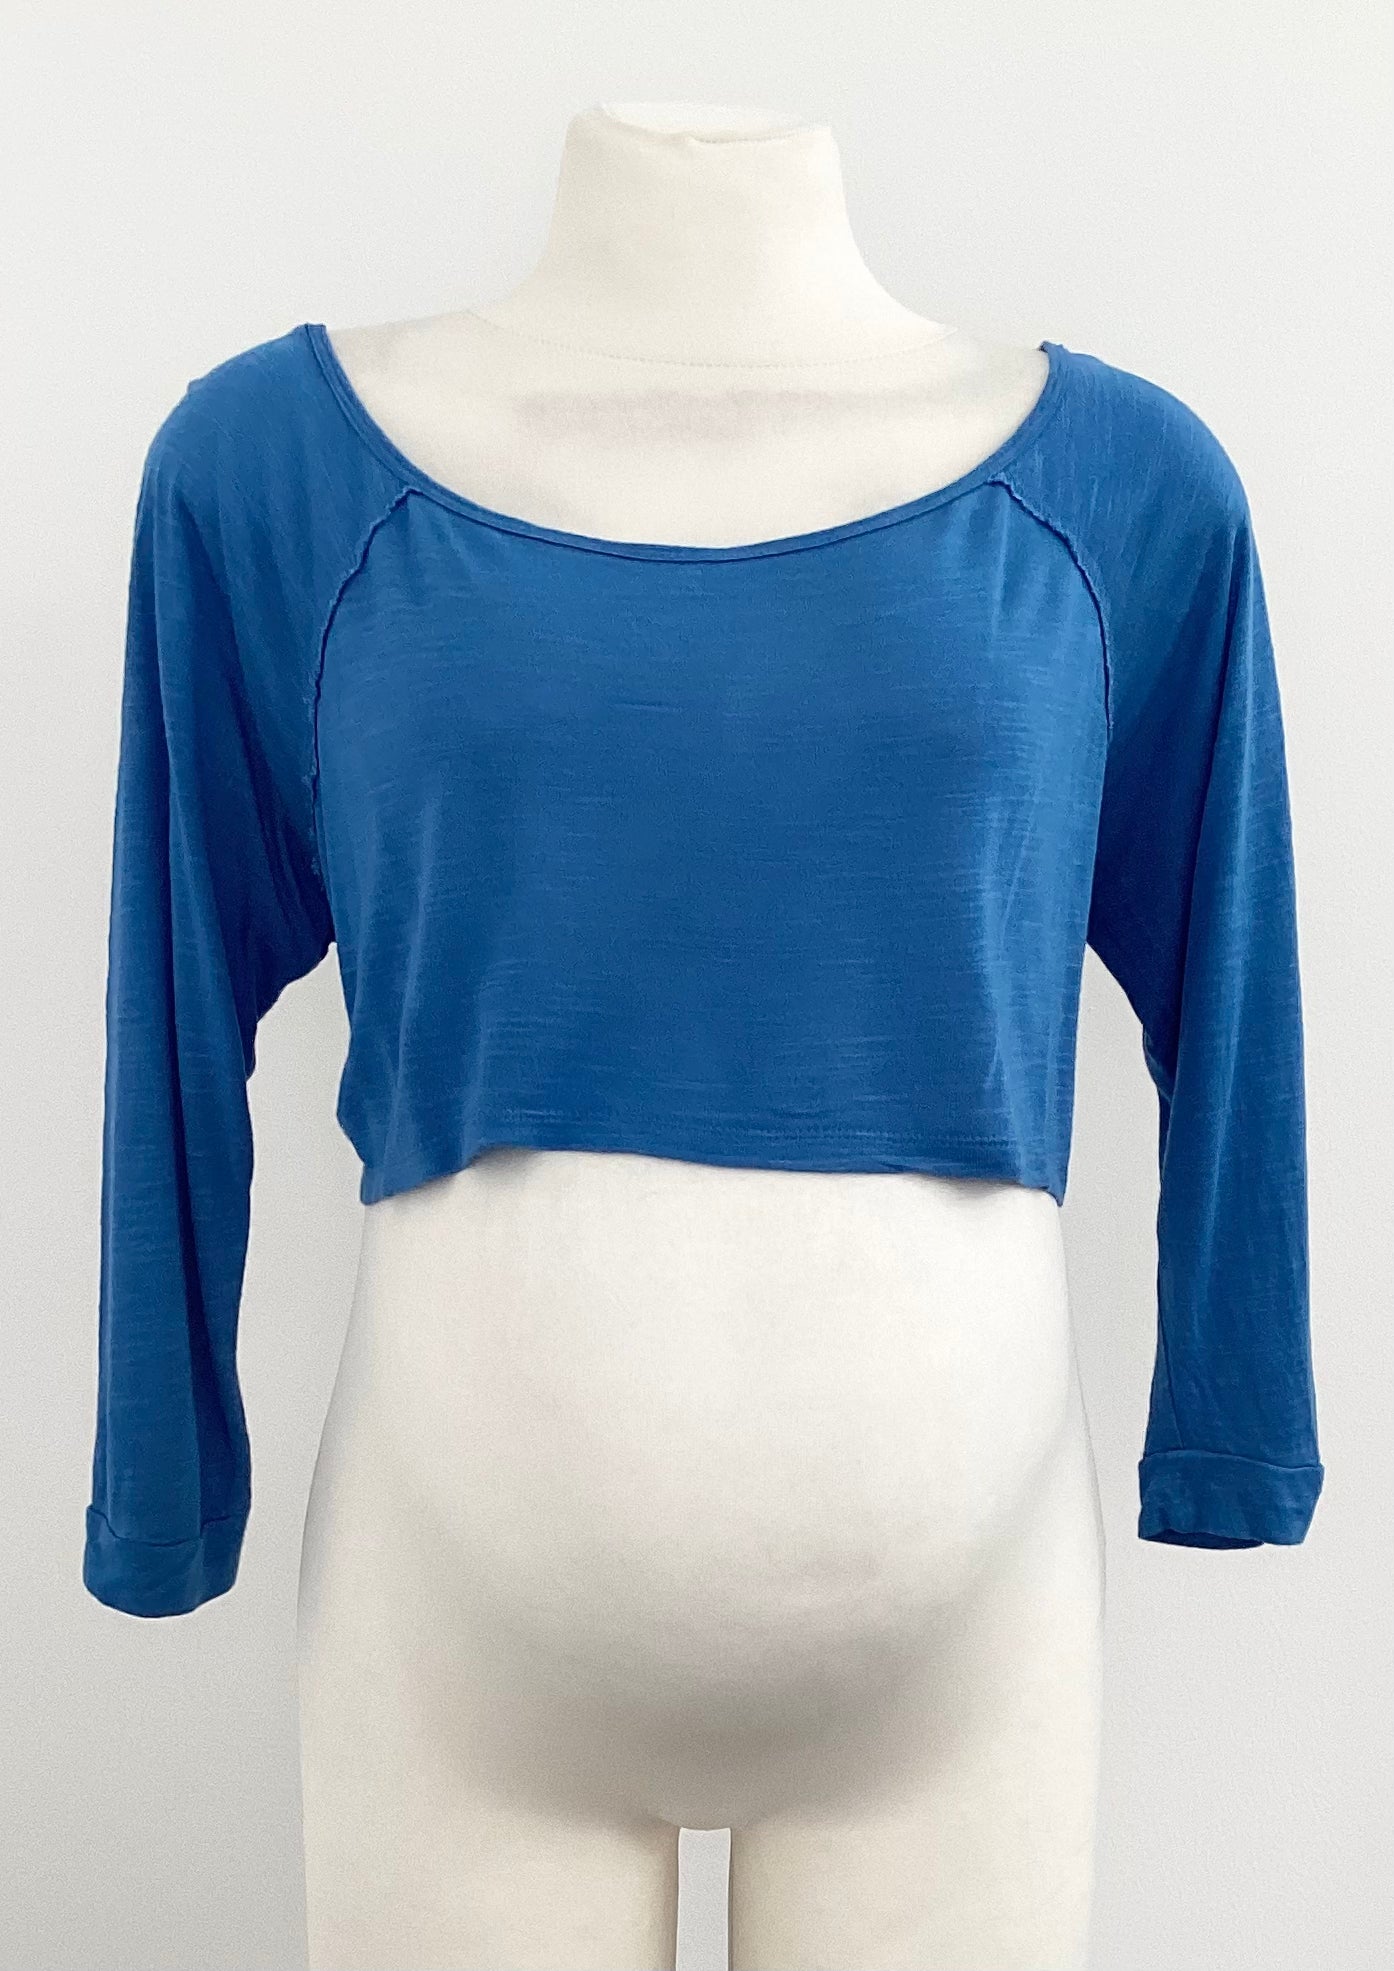 Gingersnaps Blue Short Top - Size 2 (Approx UK 10)